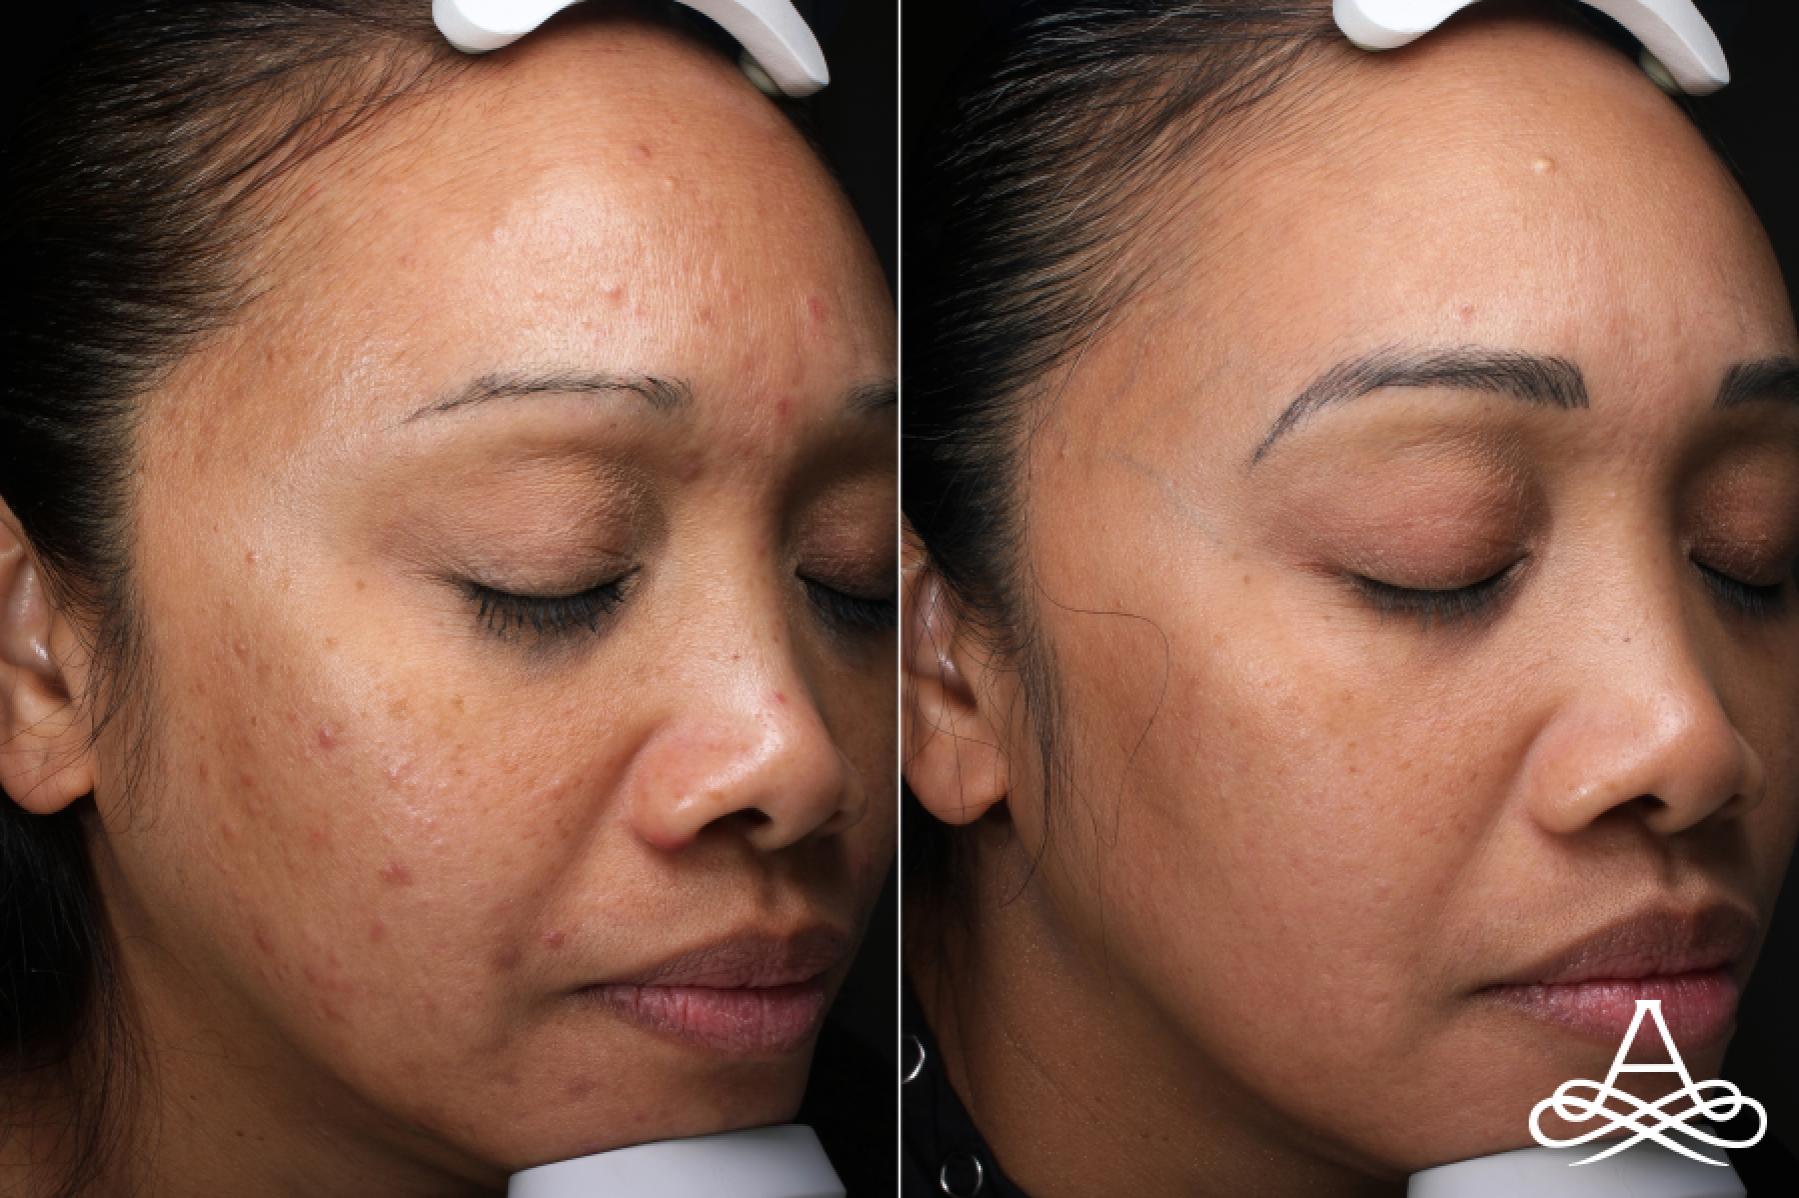 Acne Scars: Patient 2 - Before and After 3